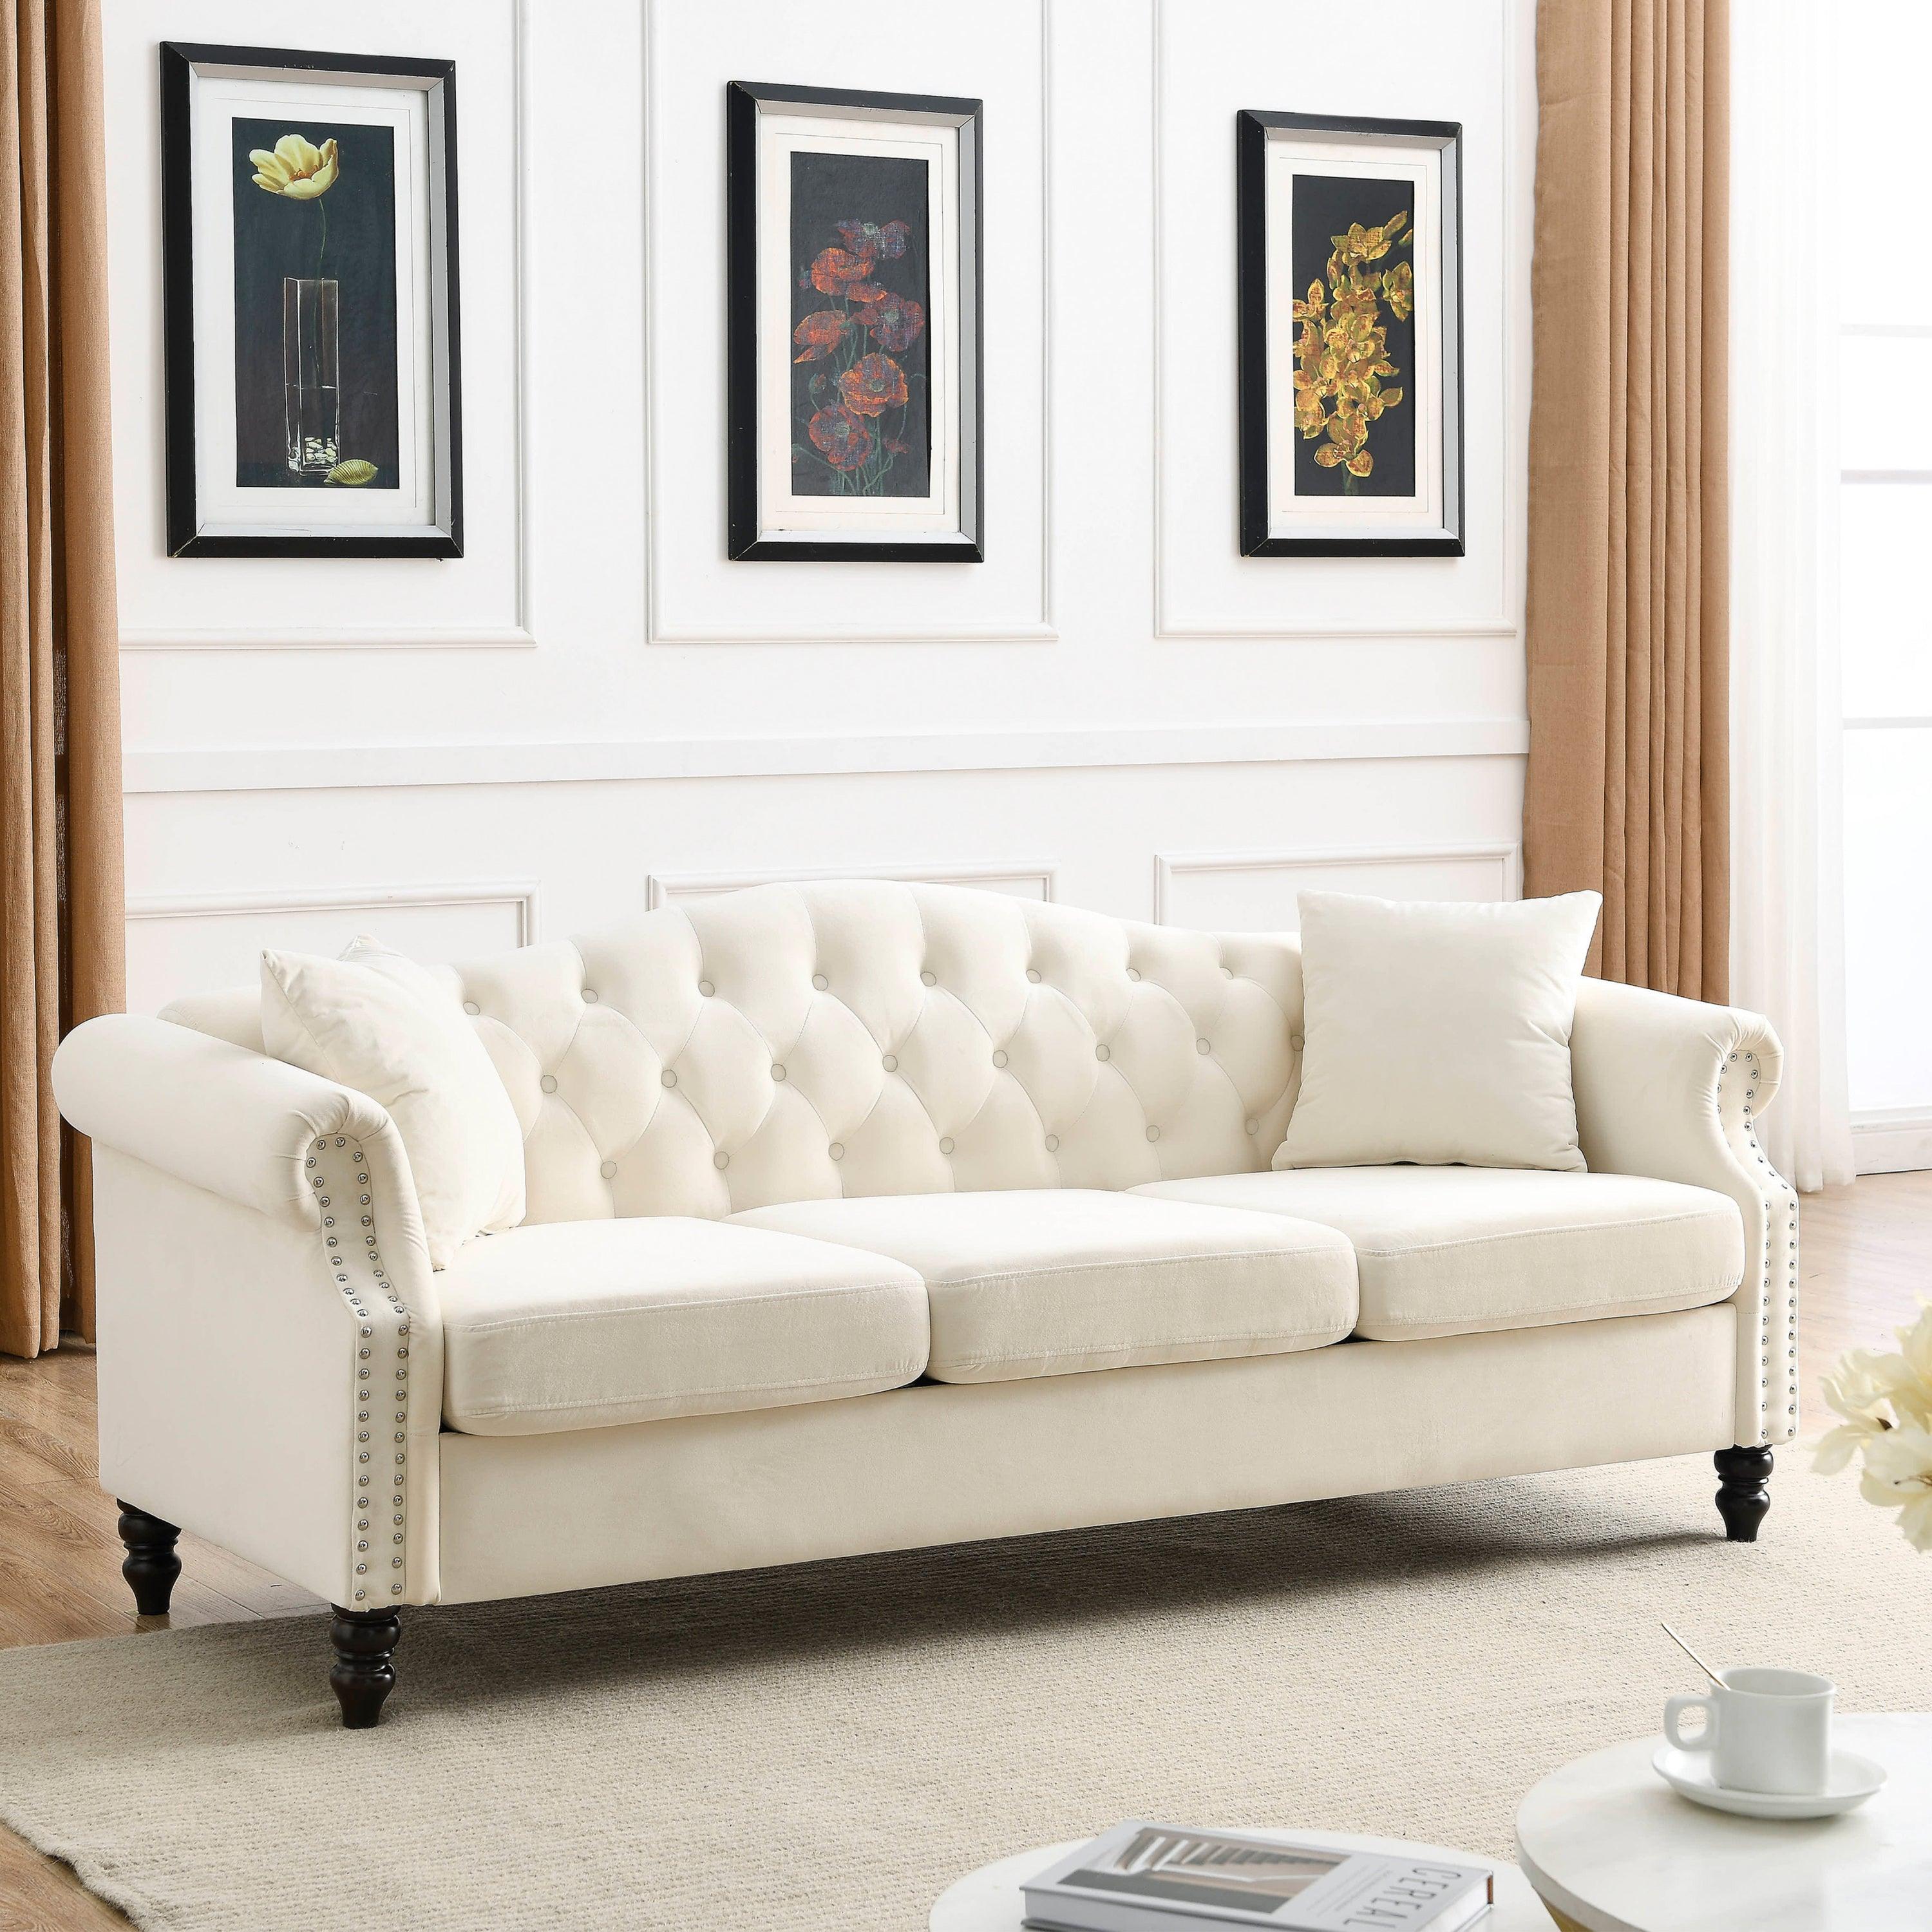 79" Chesterfield Sofa Beige Velvet For Living Room, 3 Seater Sofa Tufted Couch With Rolled Arms And Nailhead For Living Room, Bedroom, Office, Apartment, Two Pillows